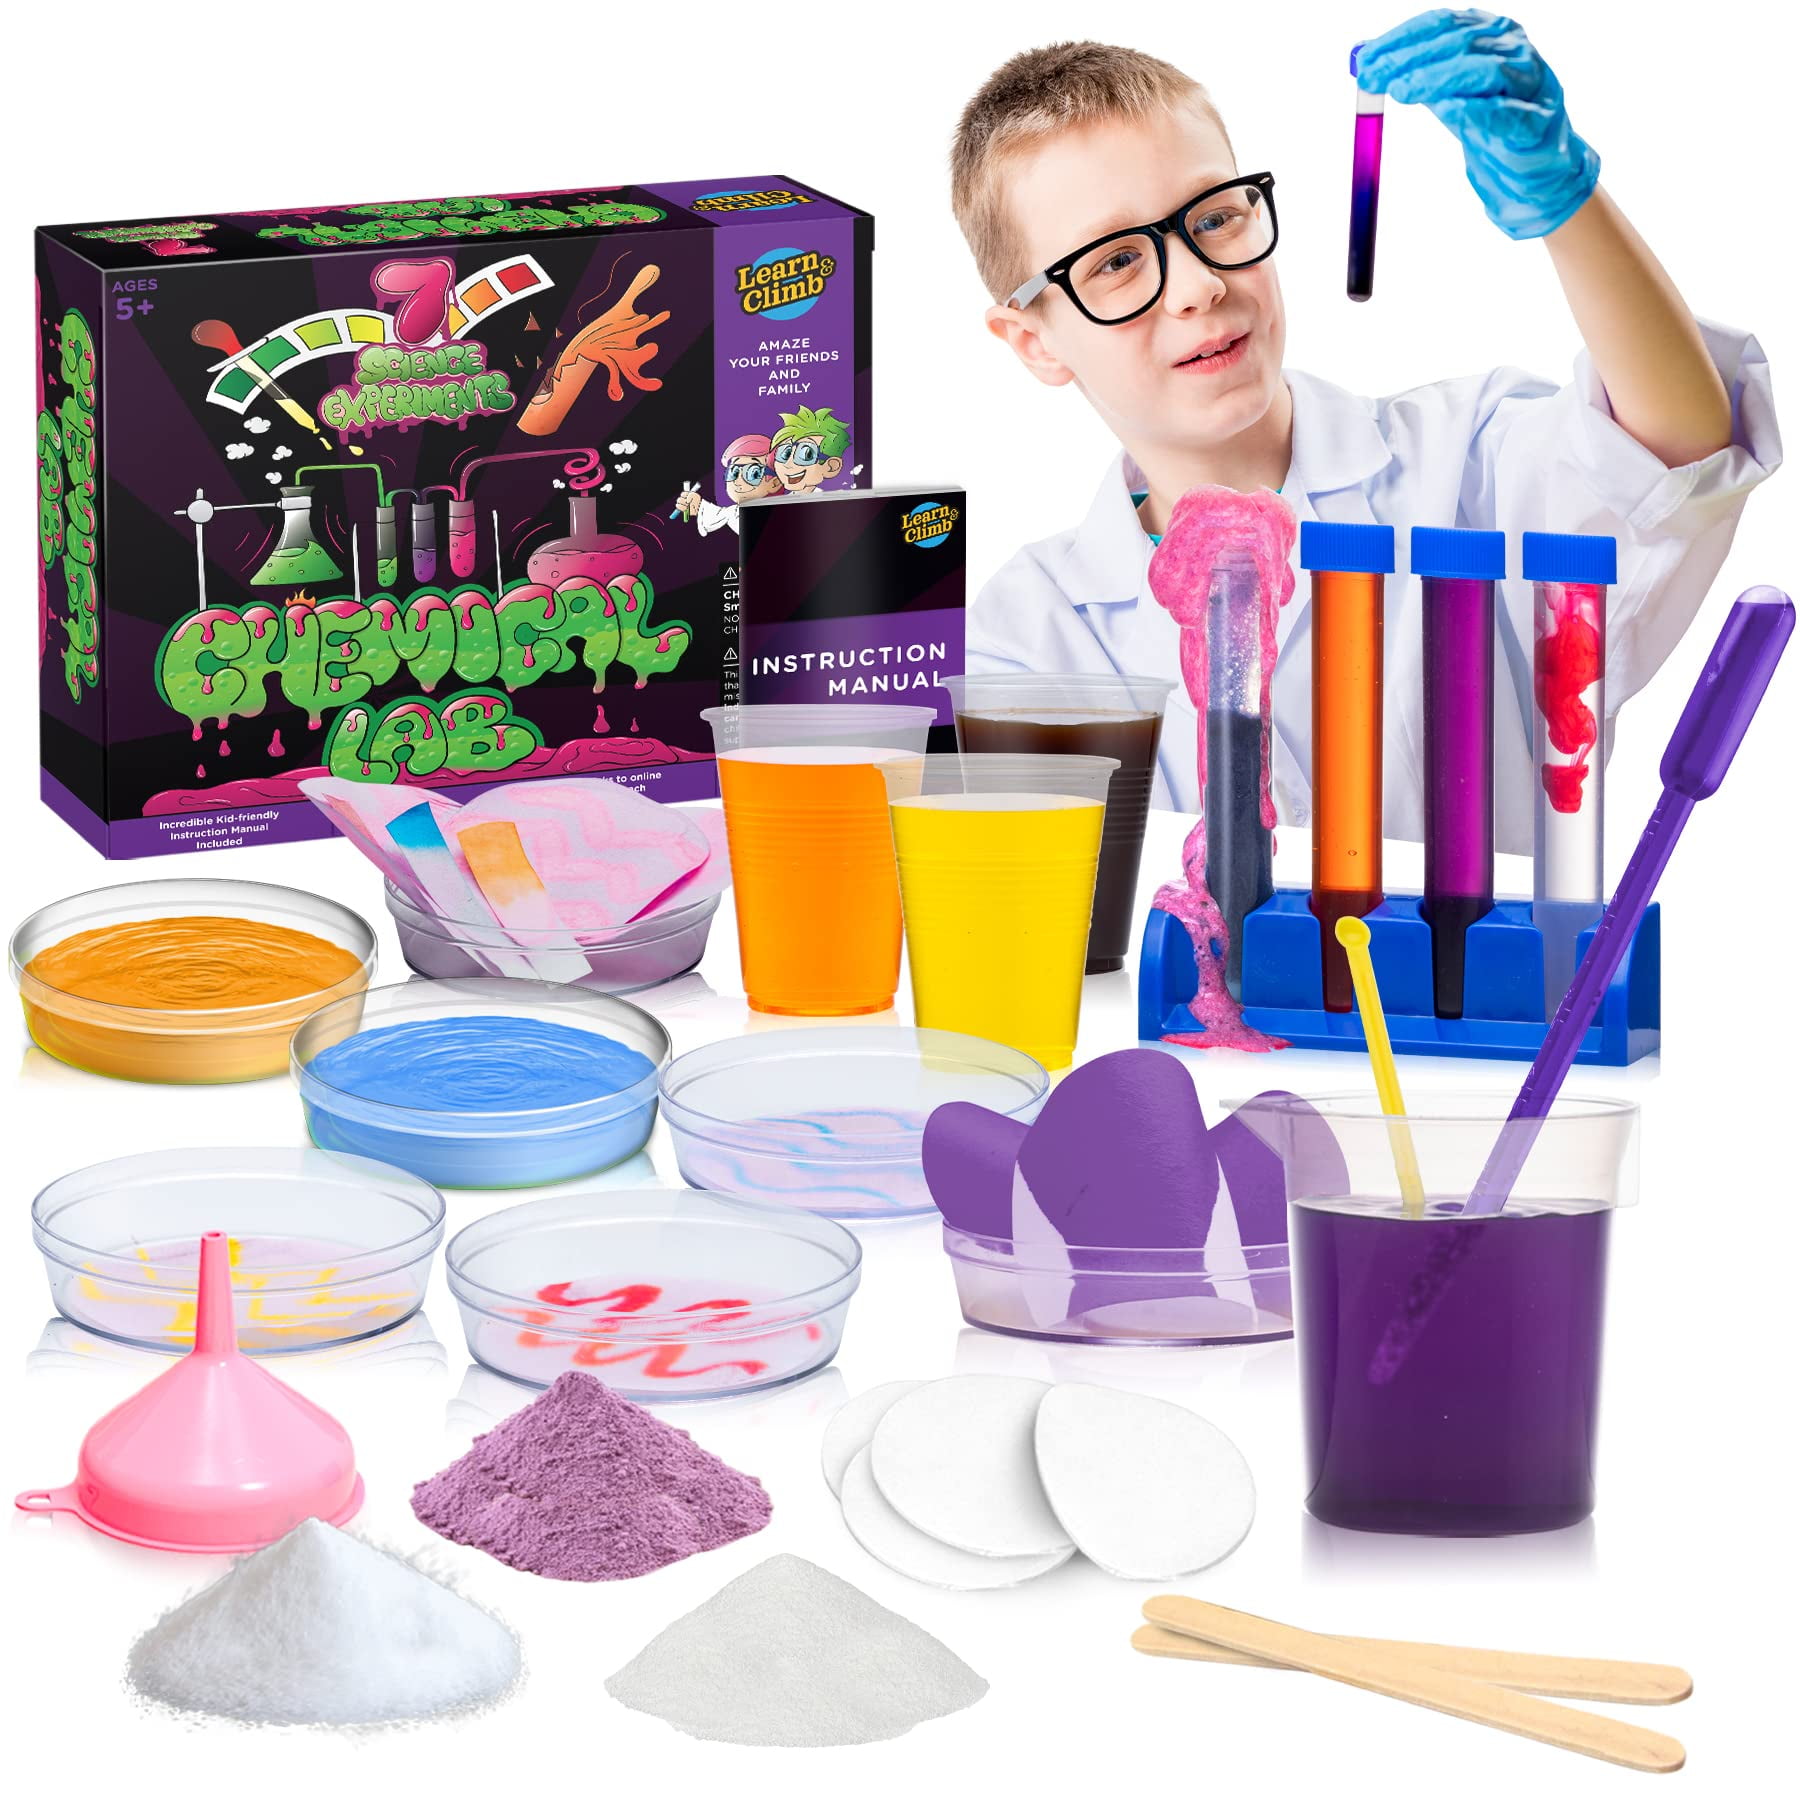 Science Kit for Kids - 21 Experiments Science Set, Great Gifts for